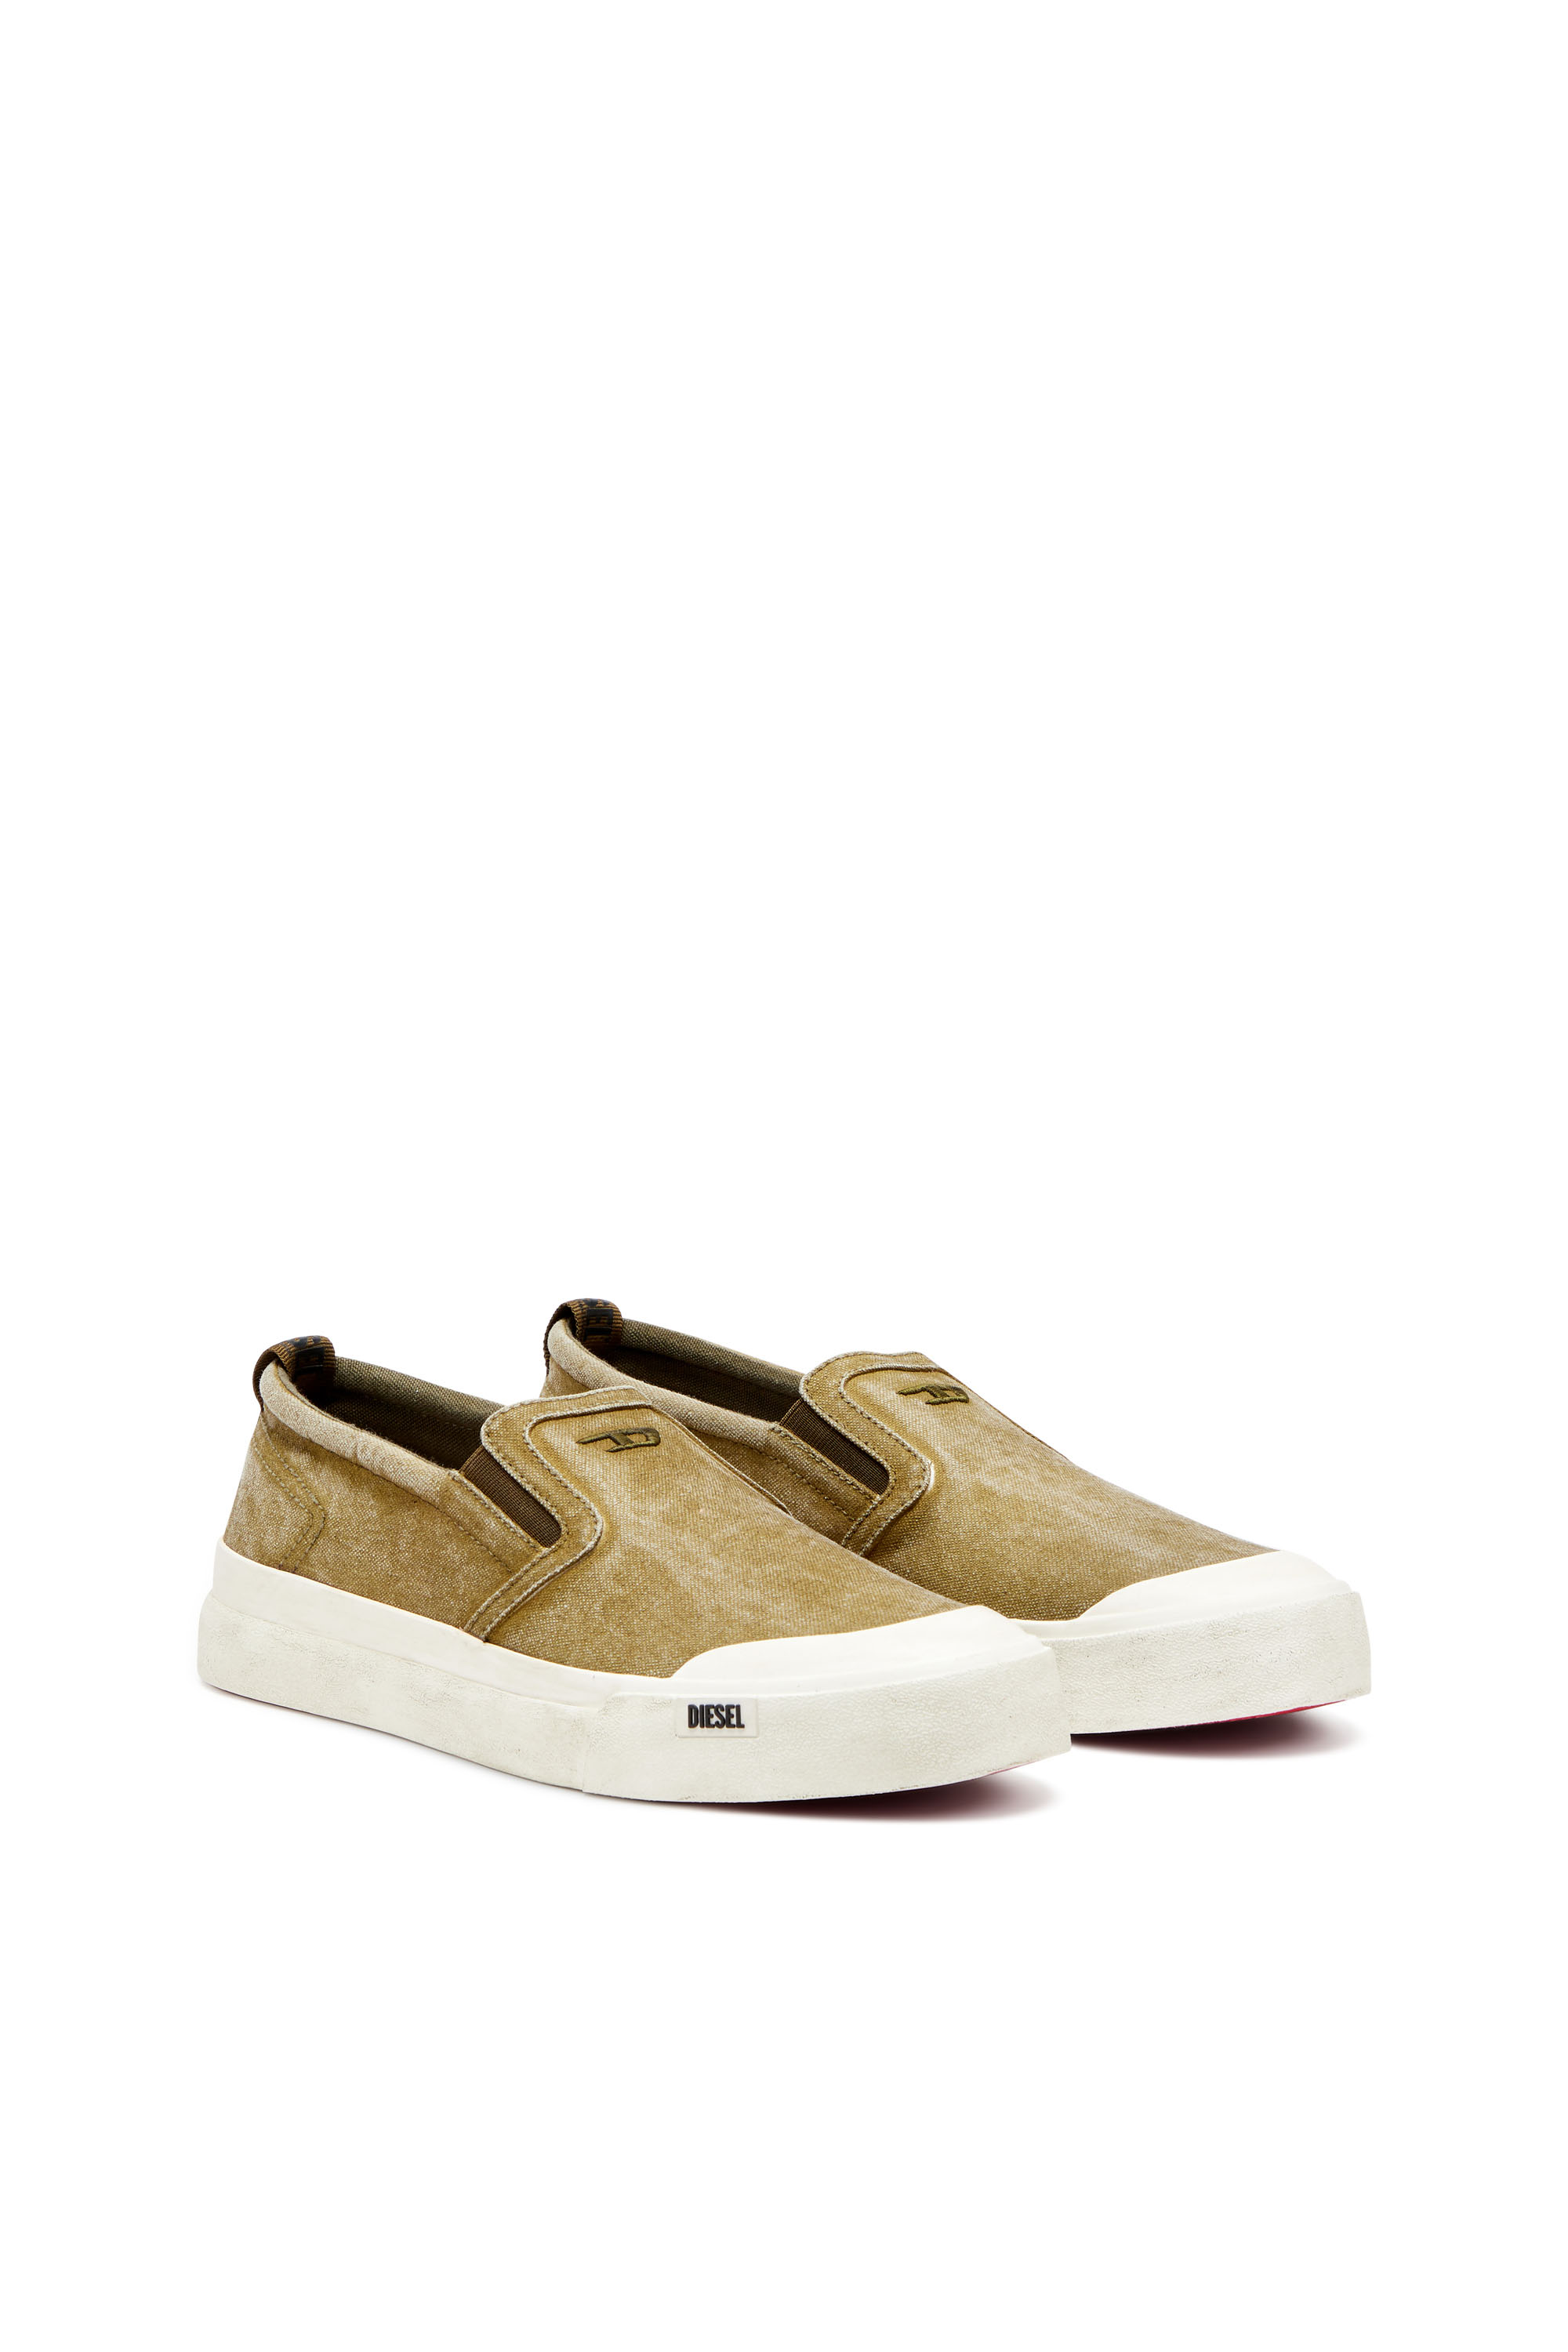 Diesel - S-ATHOS SLIP ON, Man Canvas slip-on sneakers with D embroidery in Brown - Image 3